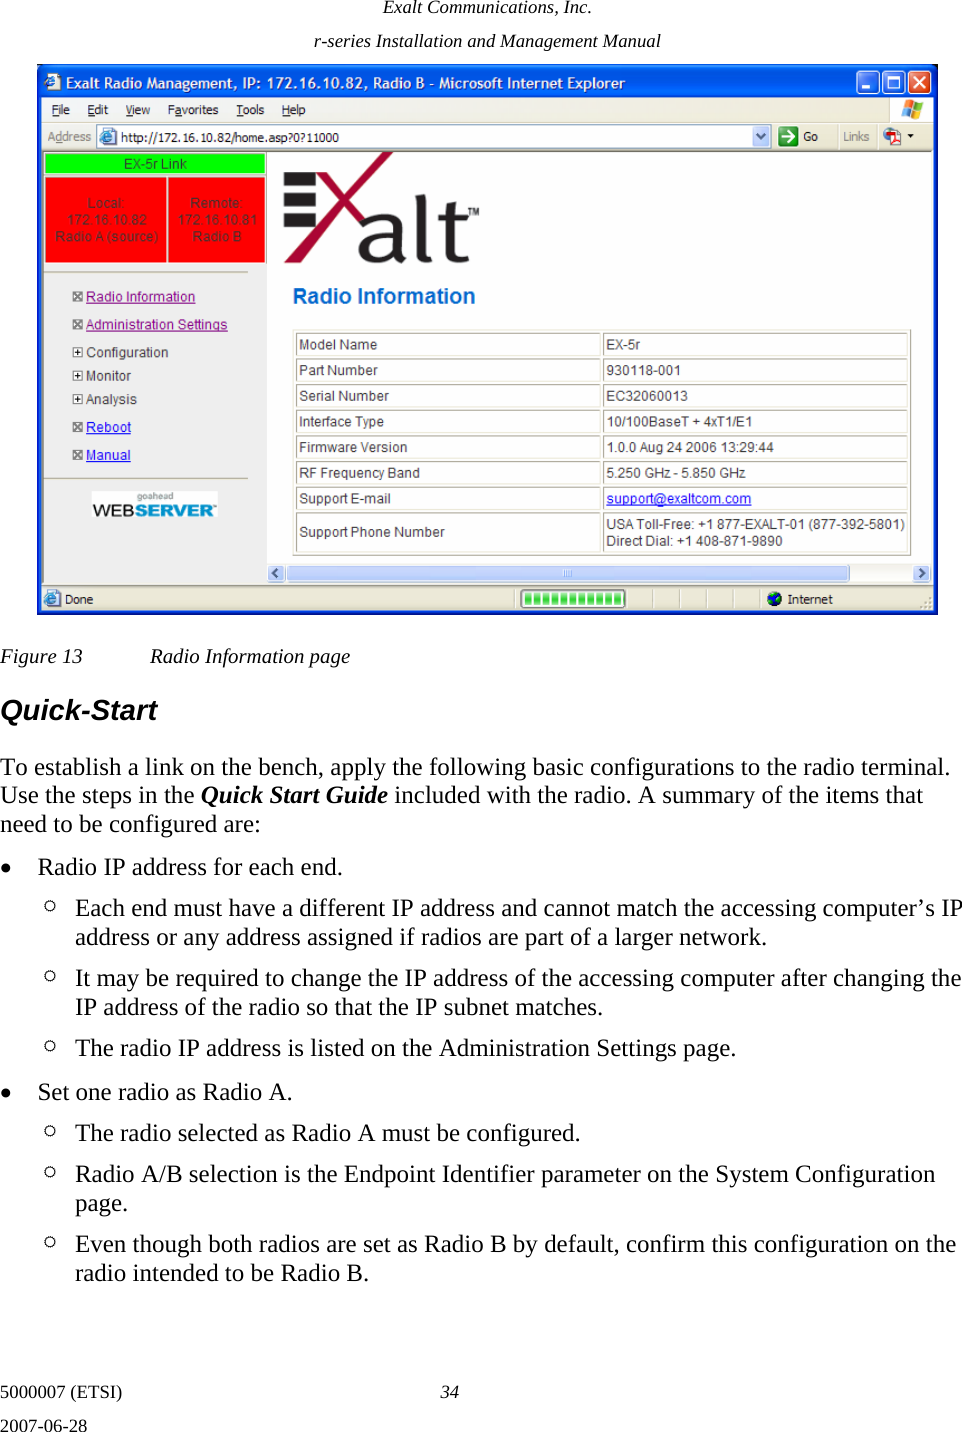 Exalt Communications, Inc. r-series Installation and Management Manual 5000007 (ETSI)  34 2007-06-28  Figure 13  Radio Information page Quick-Start To establish a link on the bench, apply the following basic configurations to the radio terminal. Use the steps in the Quick Start Guide included with the radio. A summary of the items that need to be configured are: • Radio IP address for each end.  ¶ Each end must have a different IP address and cannot match the accessing computer’s IP address or any address assigned if radios are part of a larger network. ¶ It may be required to change the IP address of the accessing computer after changing the IP address of the radio so that the IP subnet matches. ¶ The radio IP address is listed on the Administration Settings page. • Set one radio as Radio A. ¶ The radio selected as Radio A must be configured. ¶ Radio A/B selection is the Endpoint Identifier parameter on the System Configuration page. ¶ Even though both radios are set as Radio B by default, confirm this configuration on the radio intended to be Radio B. 